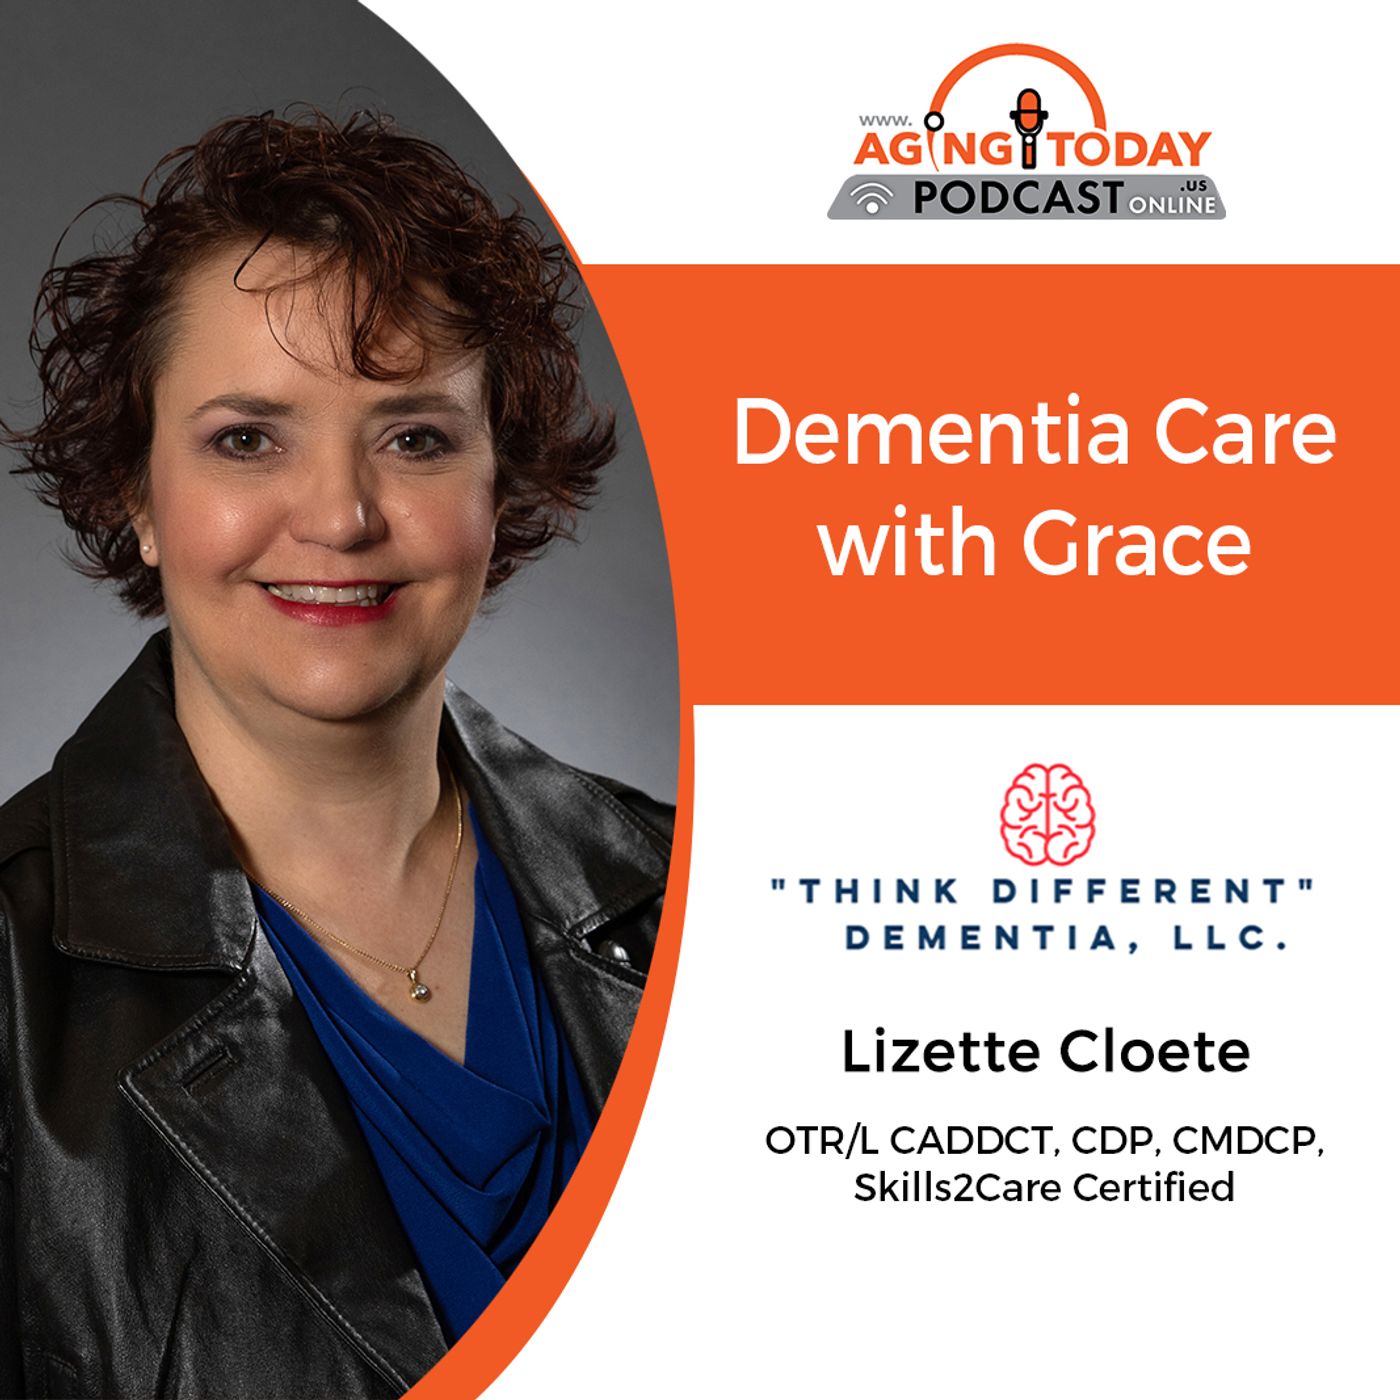 04/08/2024: Lizette Cloette, Skills2Care Certified OTR/L CADDCT, CDP, & CMDCP from “Think Different” Dementia, LLC |Dementia Care with Grace